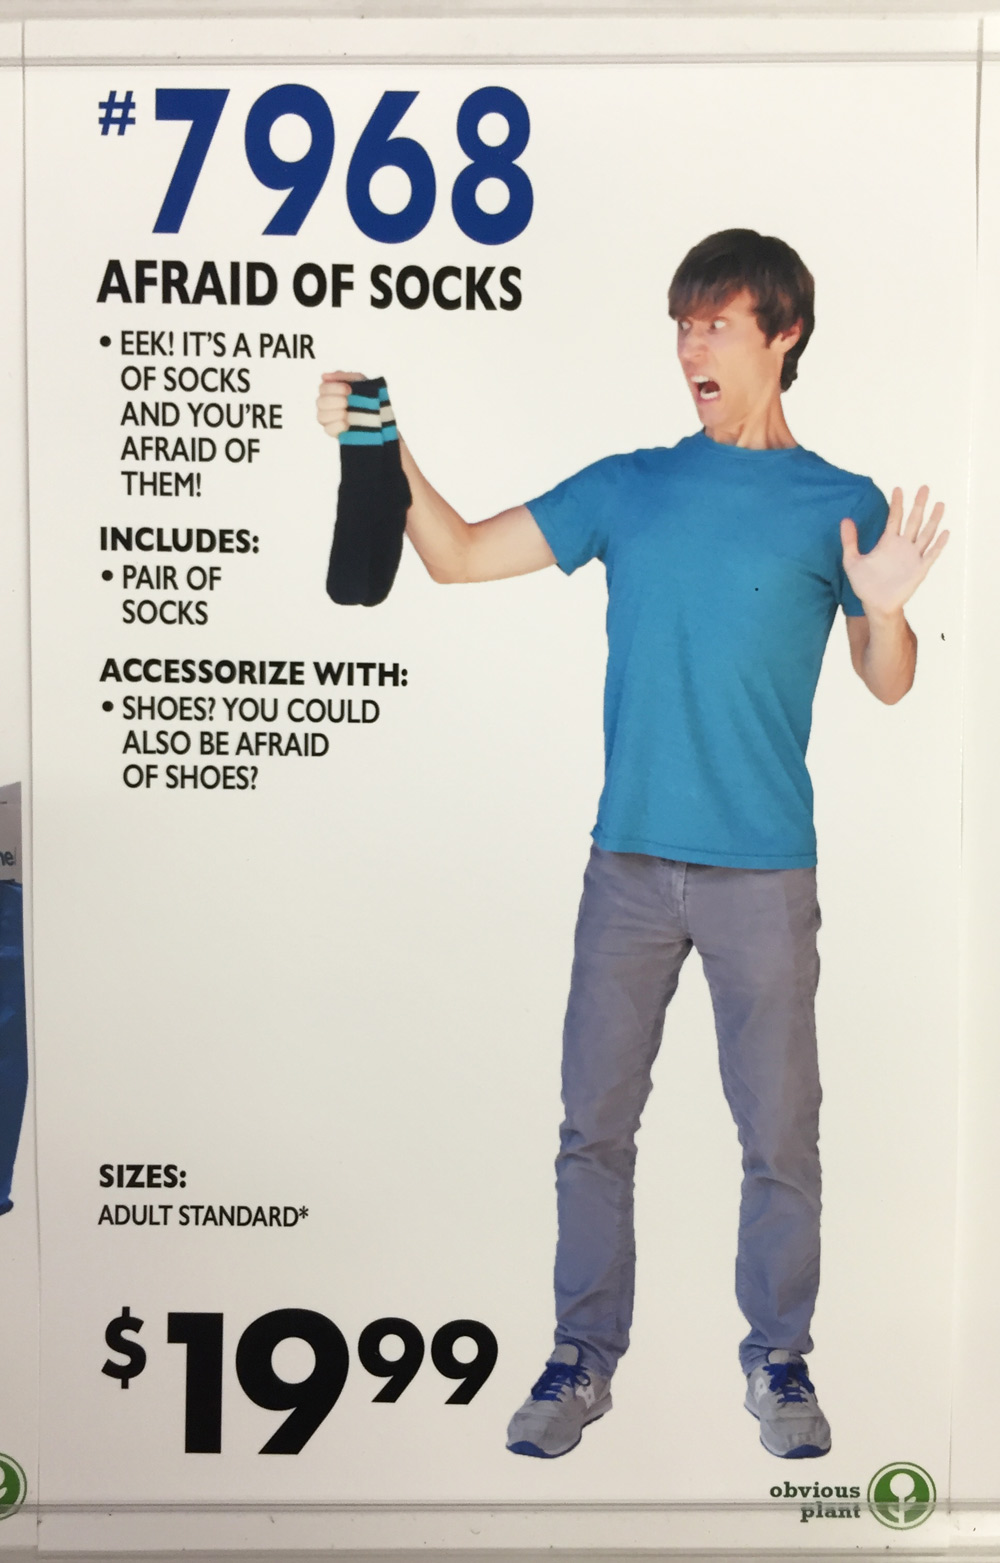 obvious plant costumes - 7968 Afraid Of Socks Eek! It'S A Pair Of Socks And You'Re Afraid Of Them! Includes Pair Of Socks Accessorize With Shoes? You Could Also Be Afraid Of Shoes? Sizes Adult Standard $1999 obvious plant